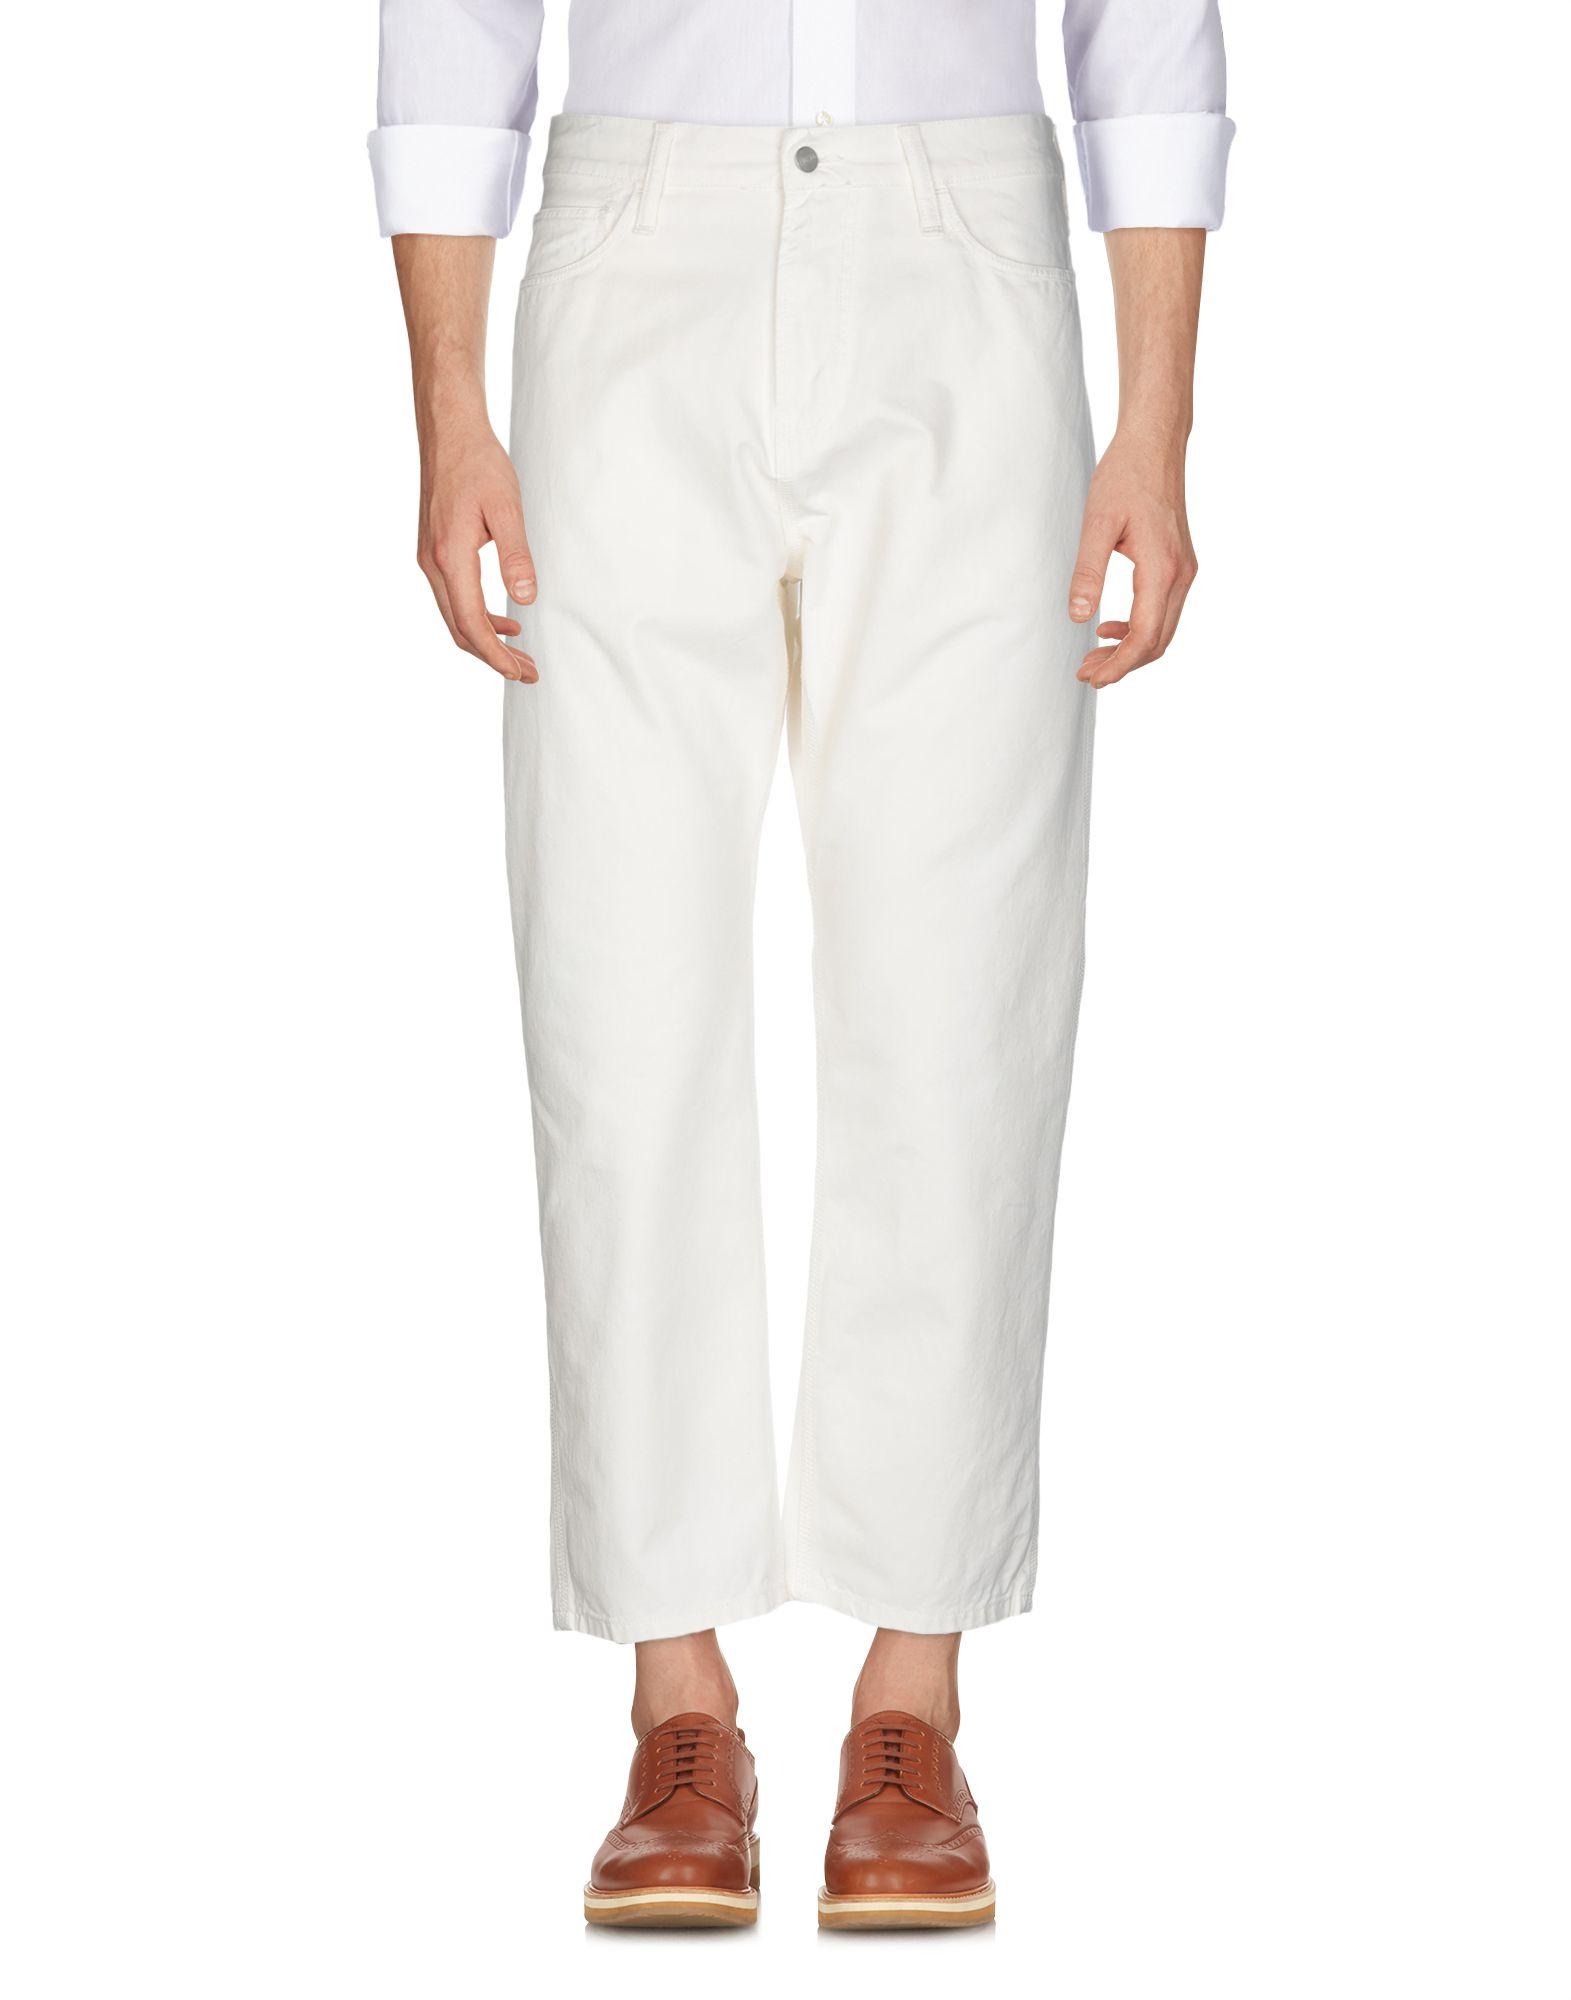 Carhartt Cotton Casual Pants in White for Men - Lyst